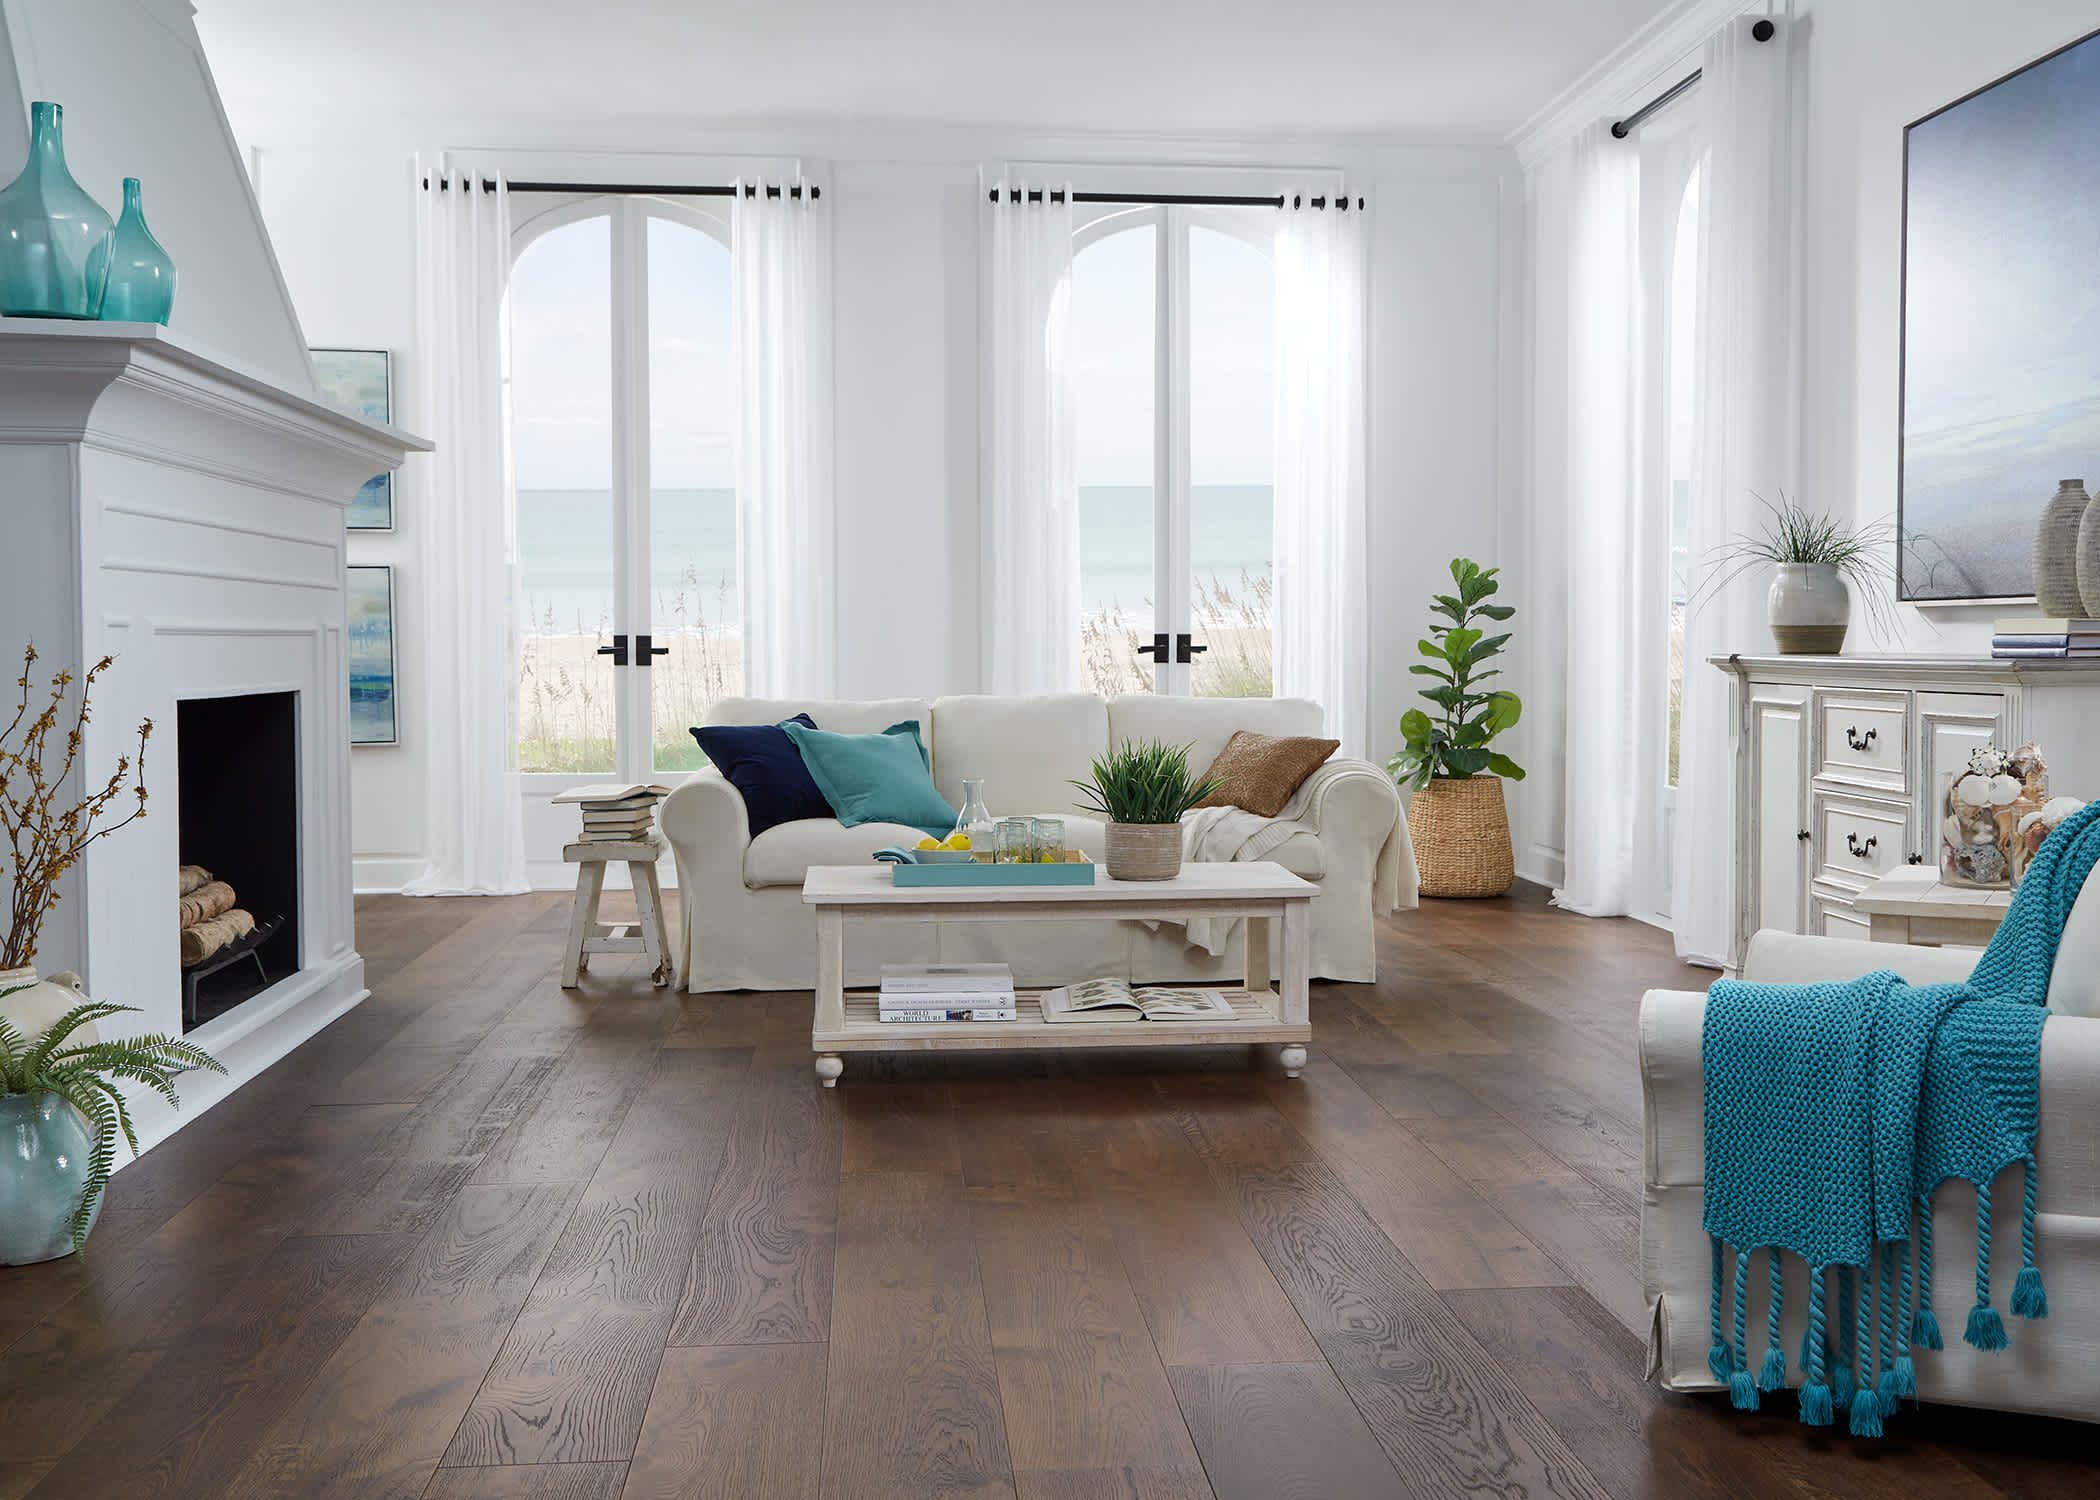 dark brown hardwood floor in living room with white furniture with blue decorative accents and throw